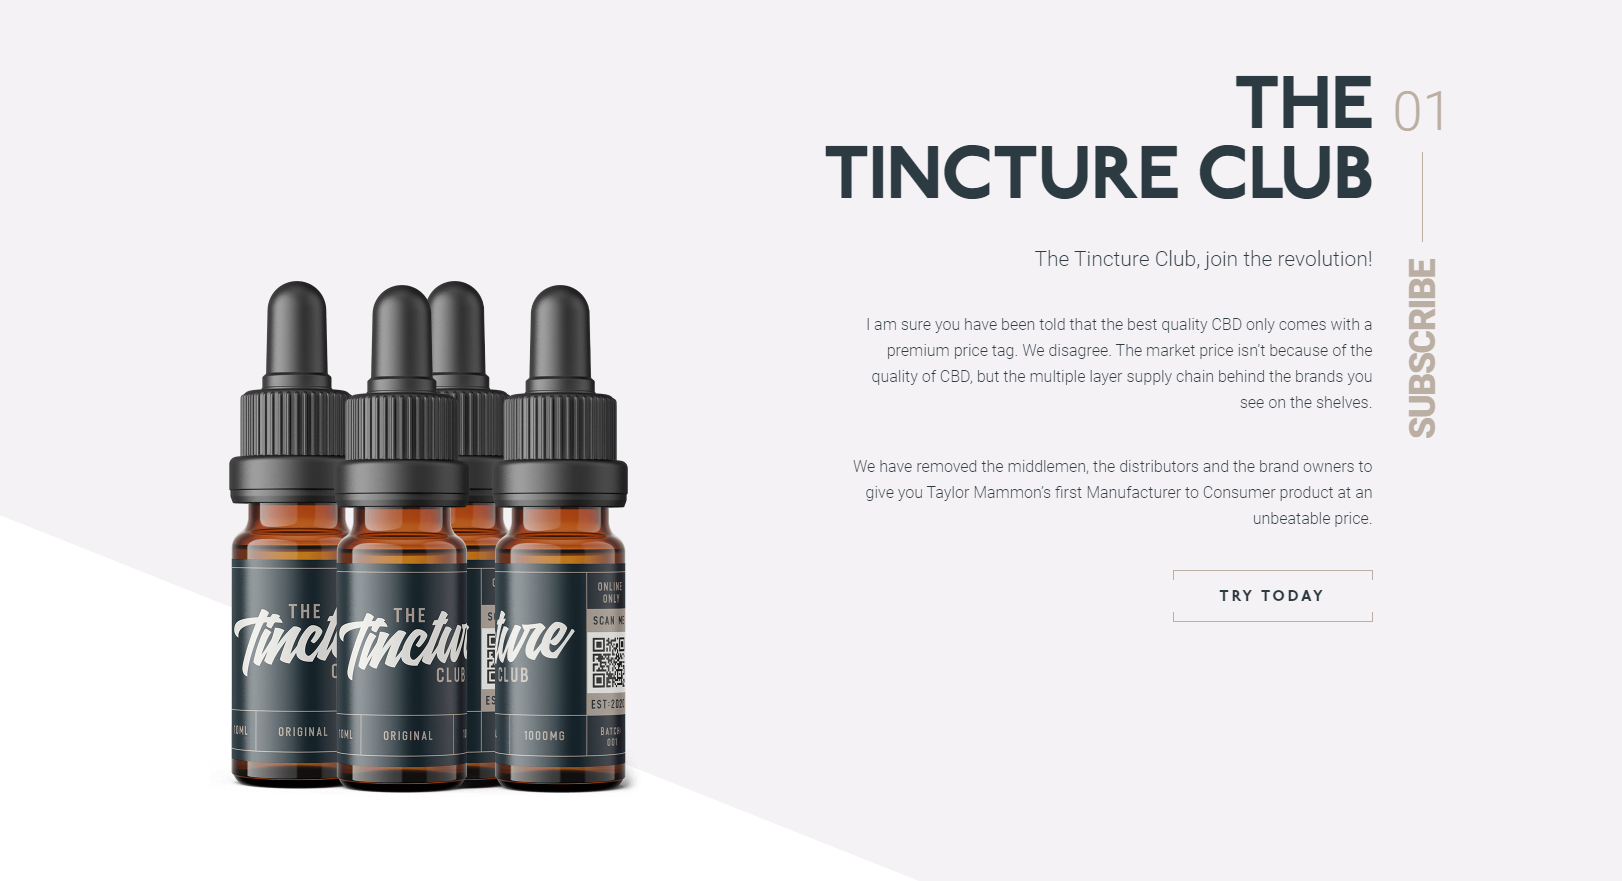 The Tincture Club Flyer designed by Cardboard Creative